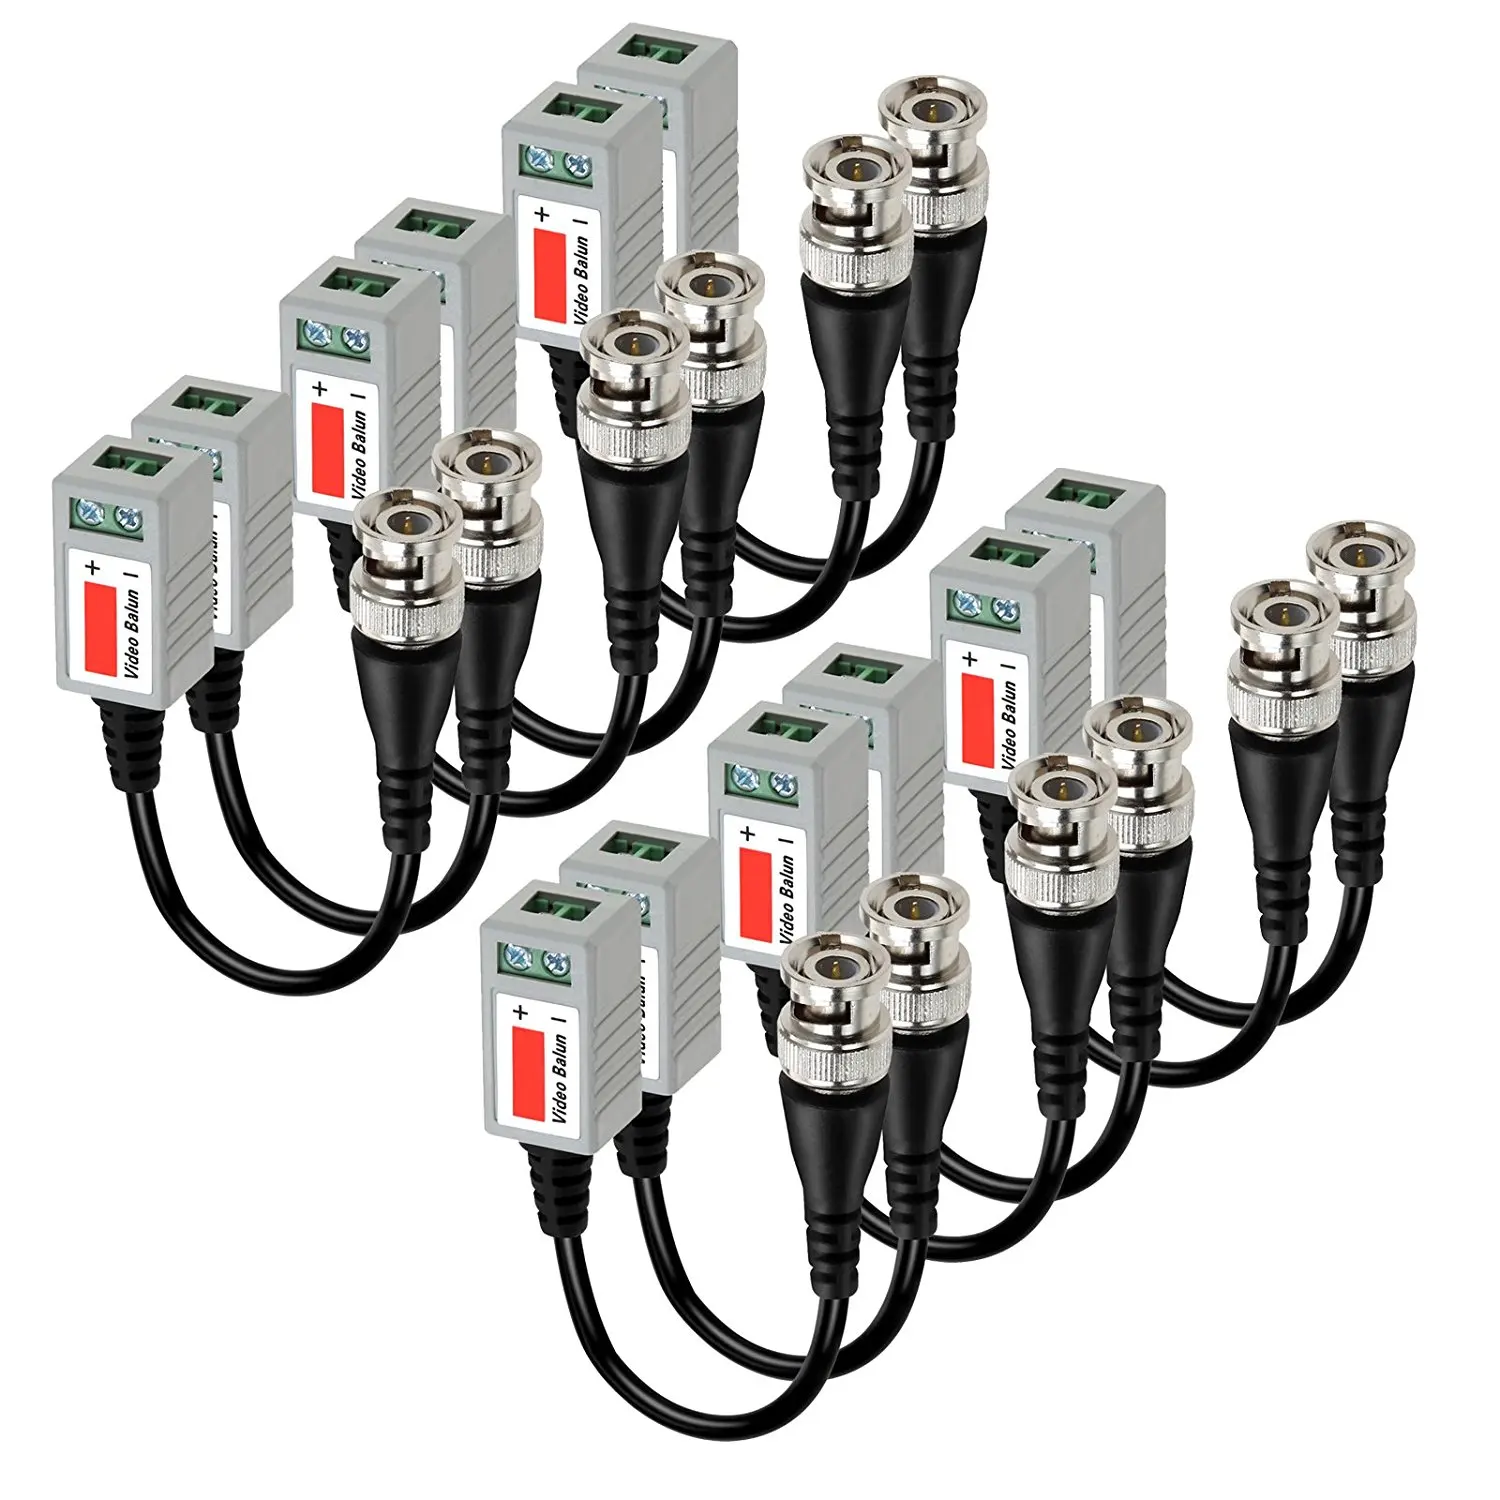 Coax CAT5 Camera CCTV Passive BNC Video Balun to UTP Transceiver Connector Twisted Cable (8Pairs 16pcs)